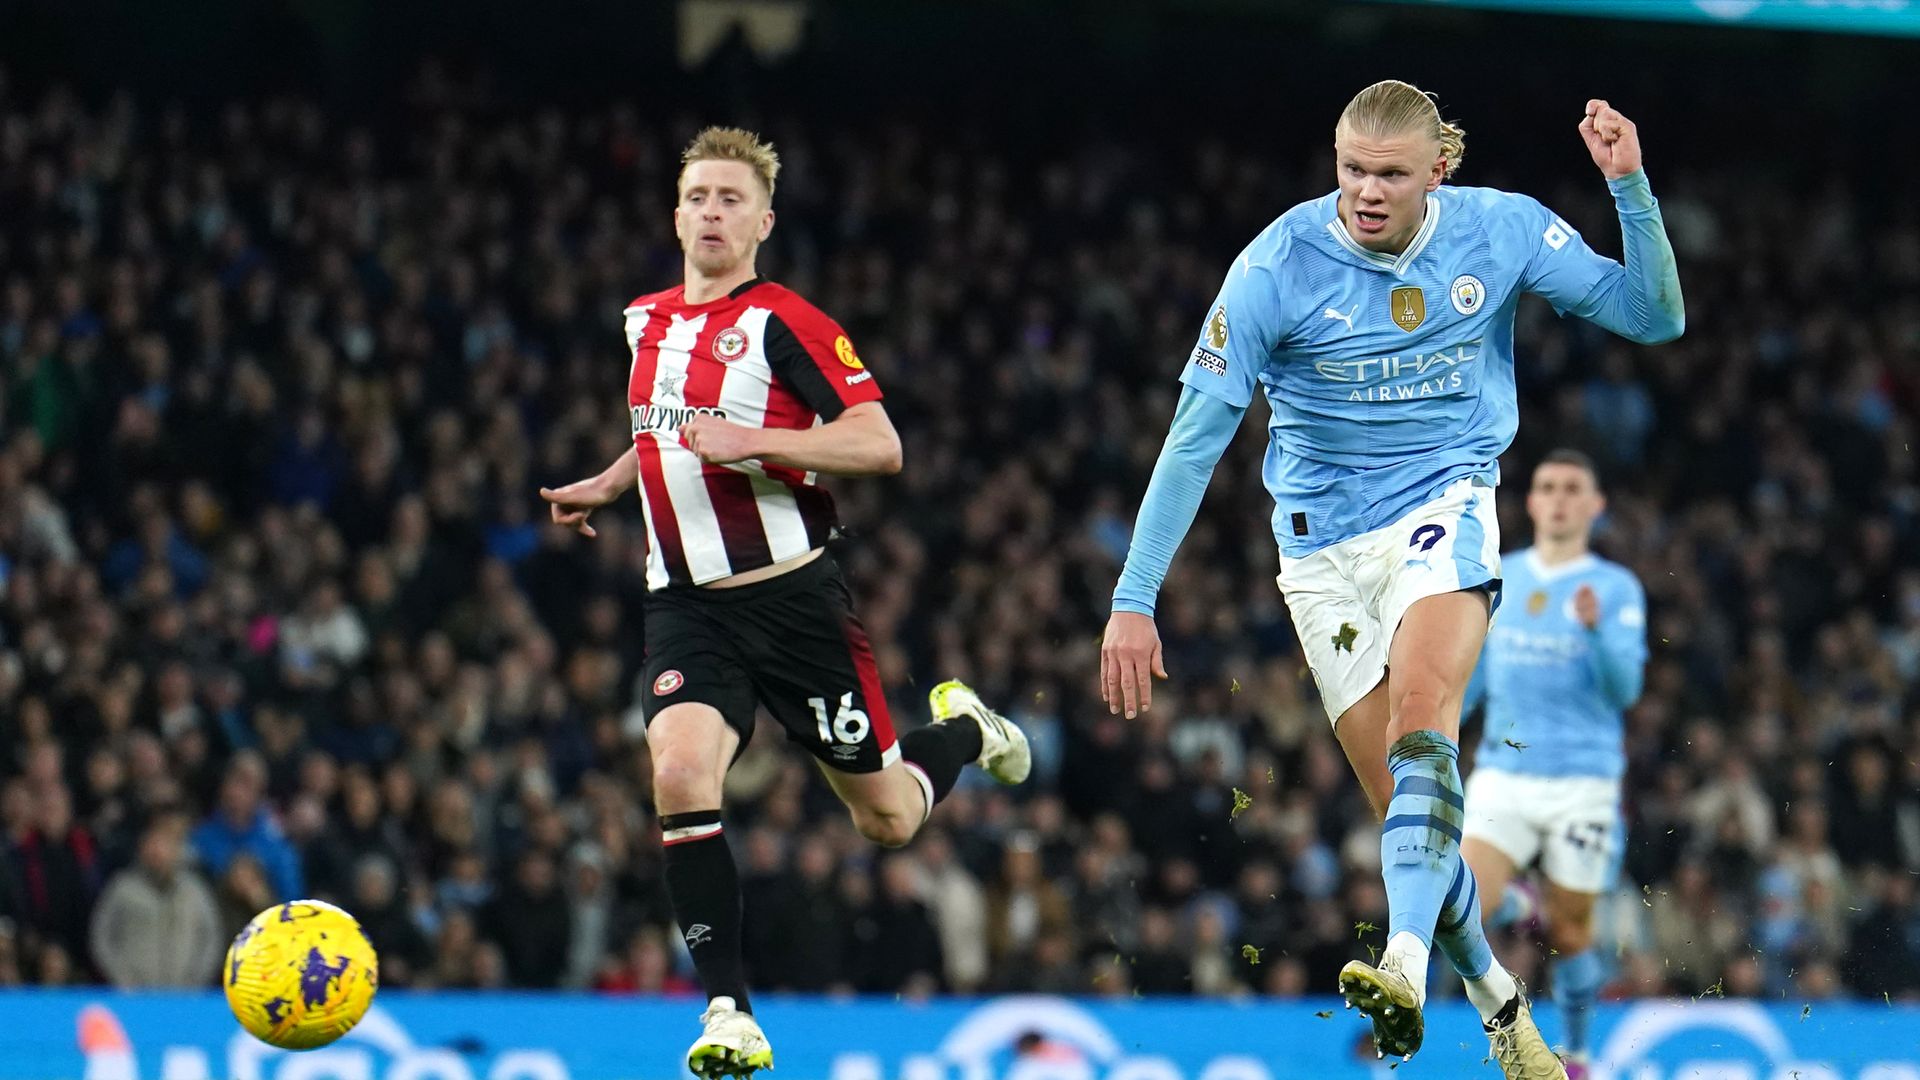 Man City close in on Liverpool with Haaland-inspired win over Brentford